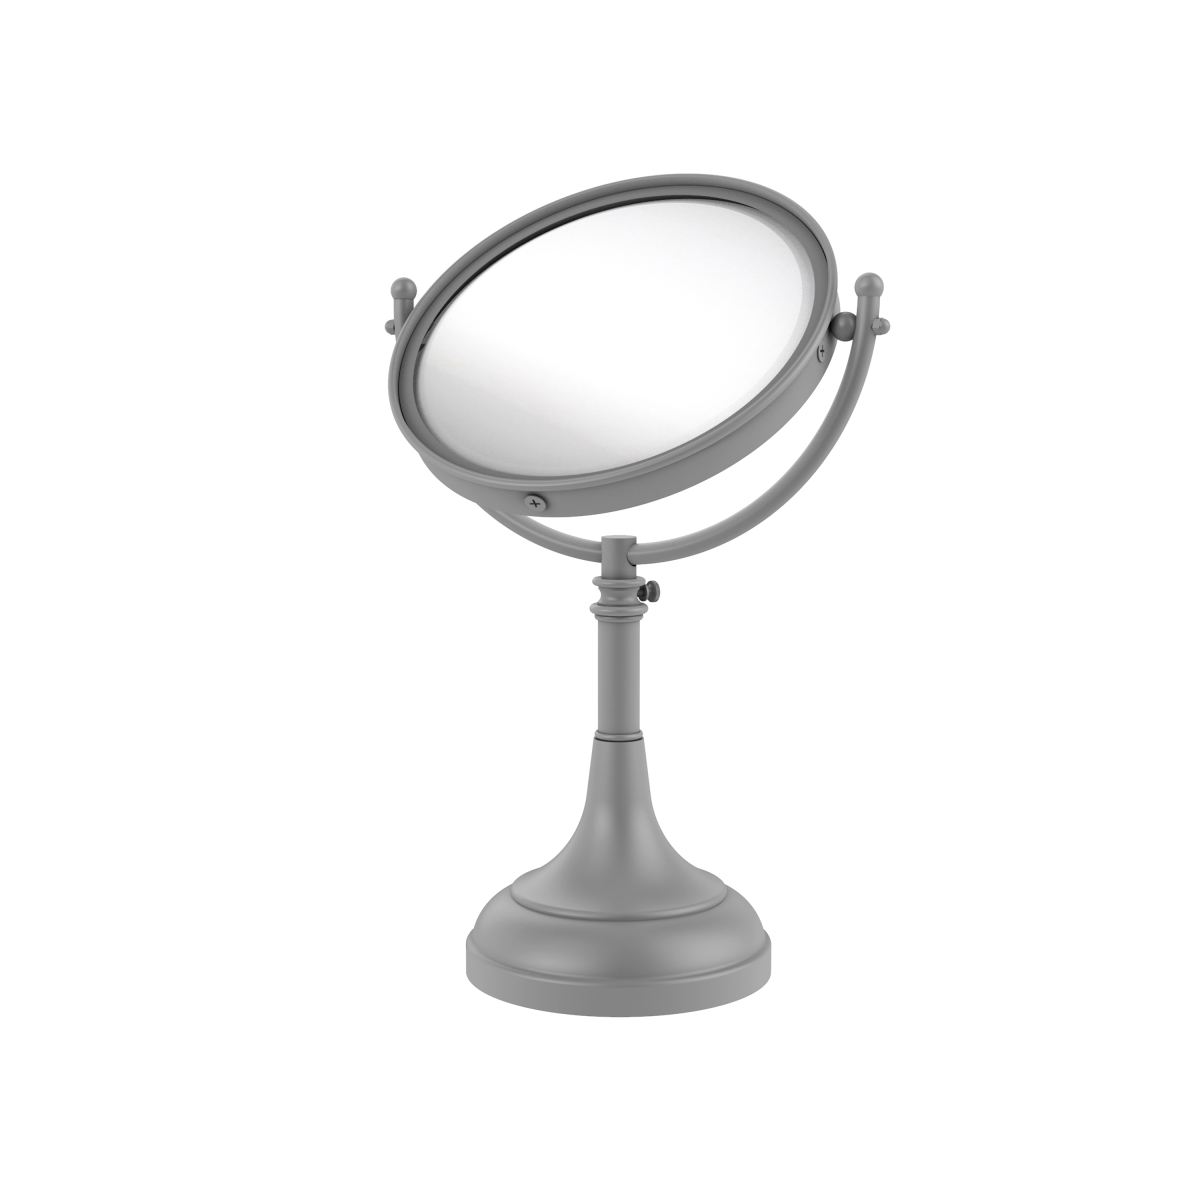 Picture of Allied Brass DM-1-4X-GYM 8 in. Height Adjustable Vanity Top Make-Up Mirror 4X Magnification, Matte Gray